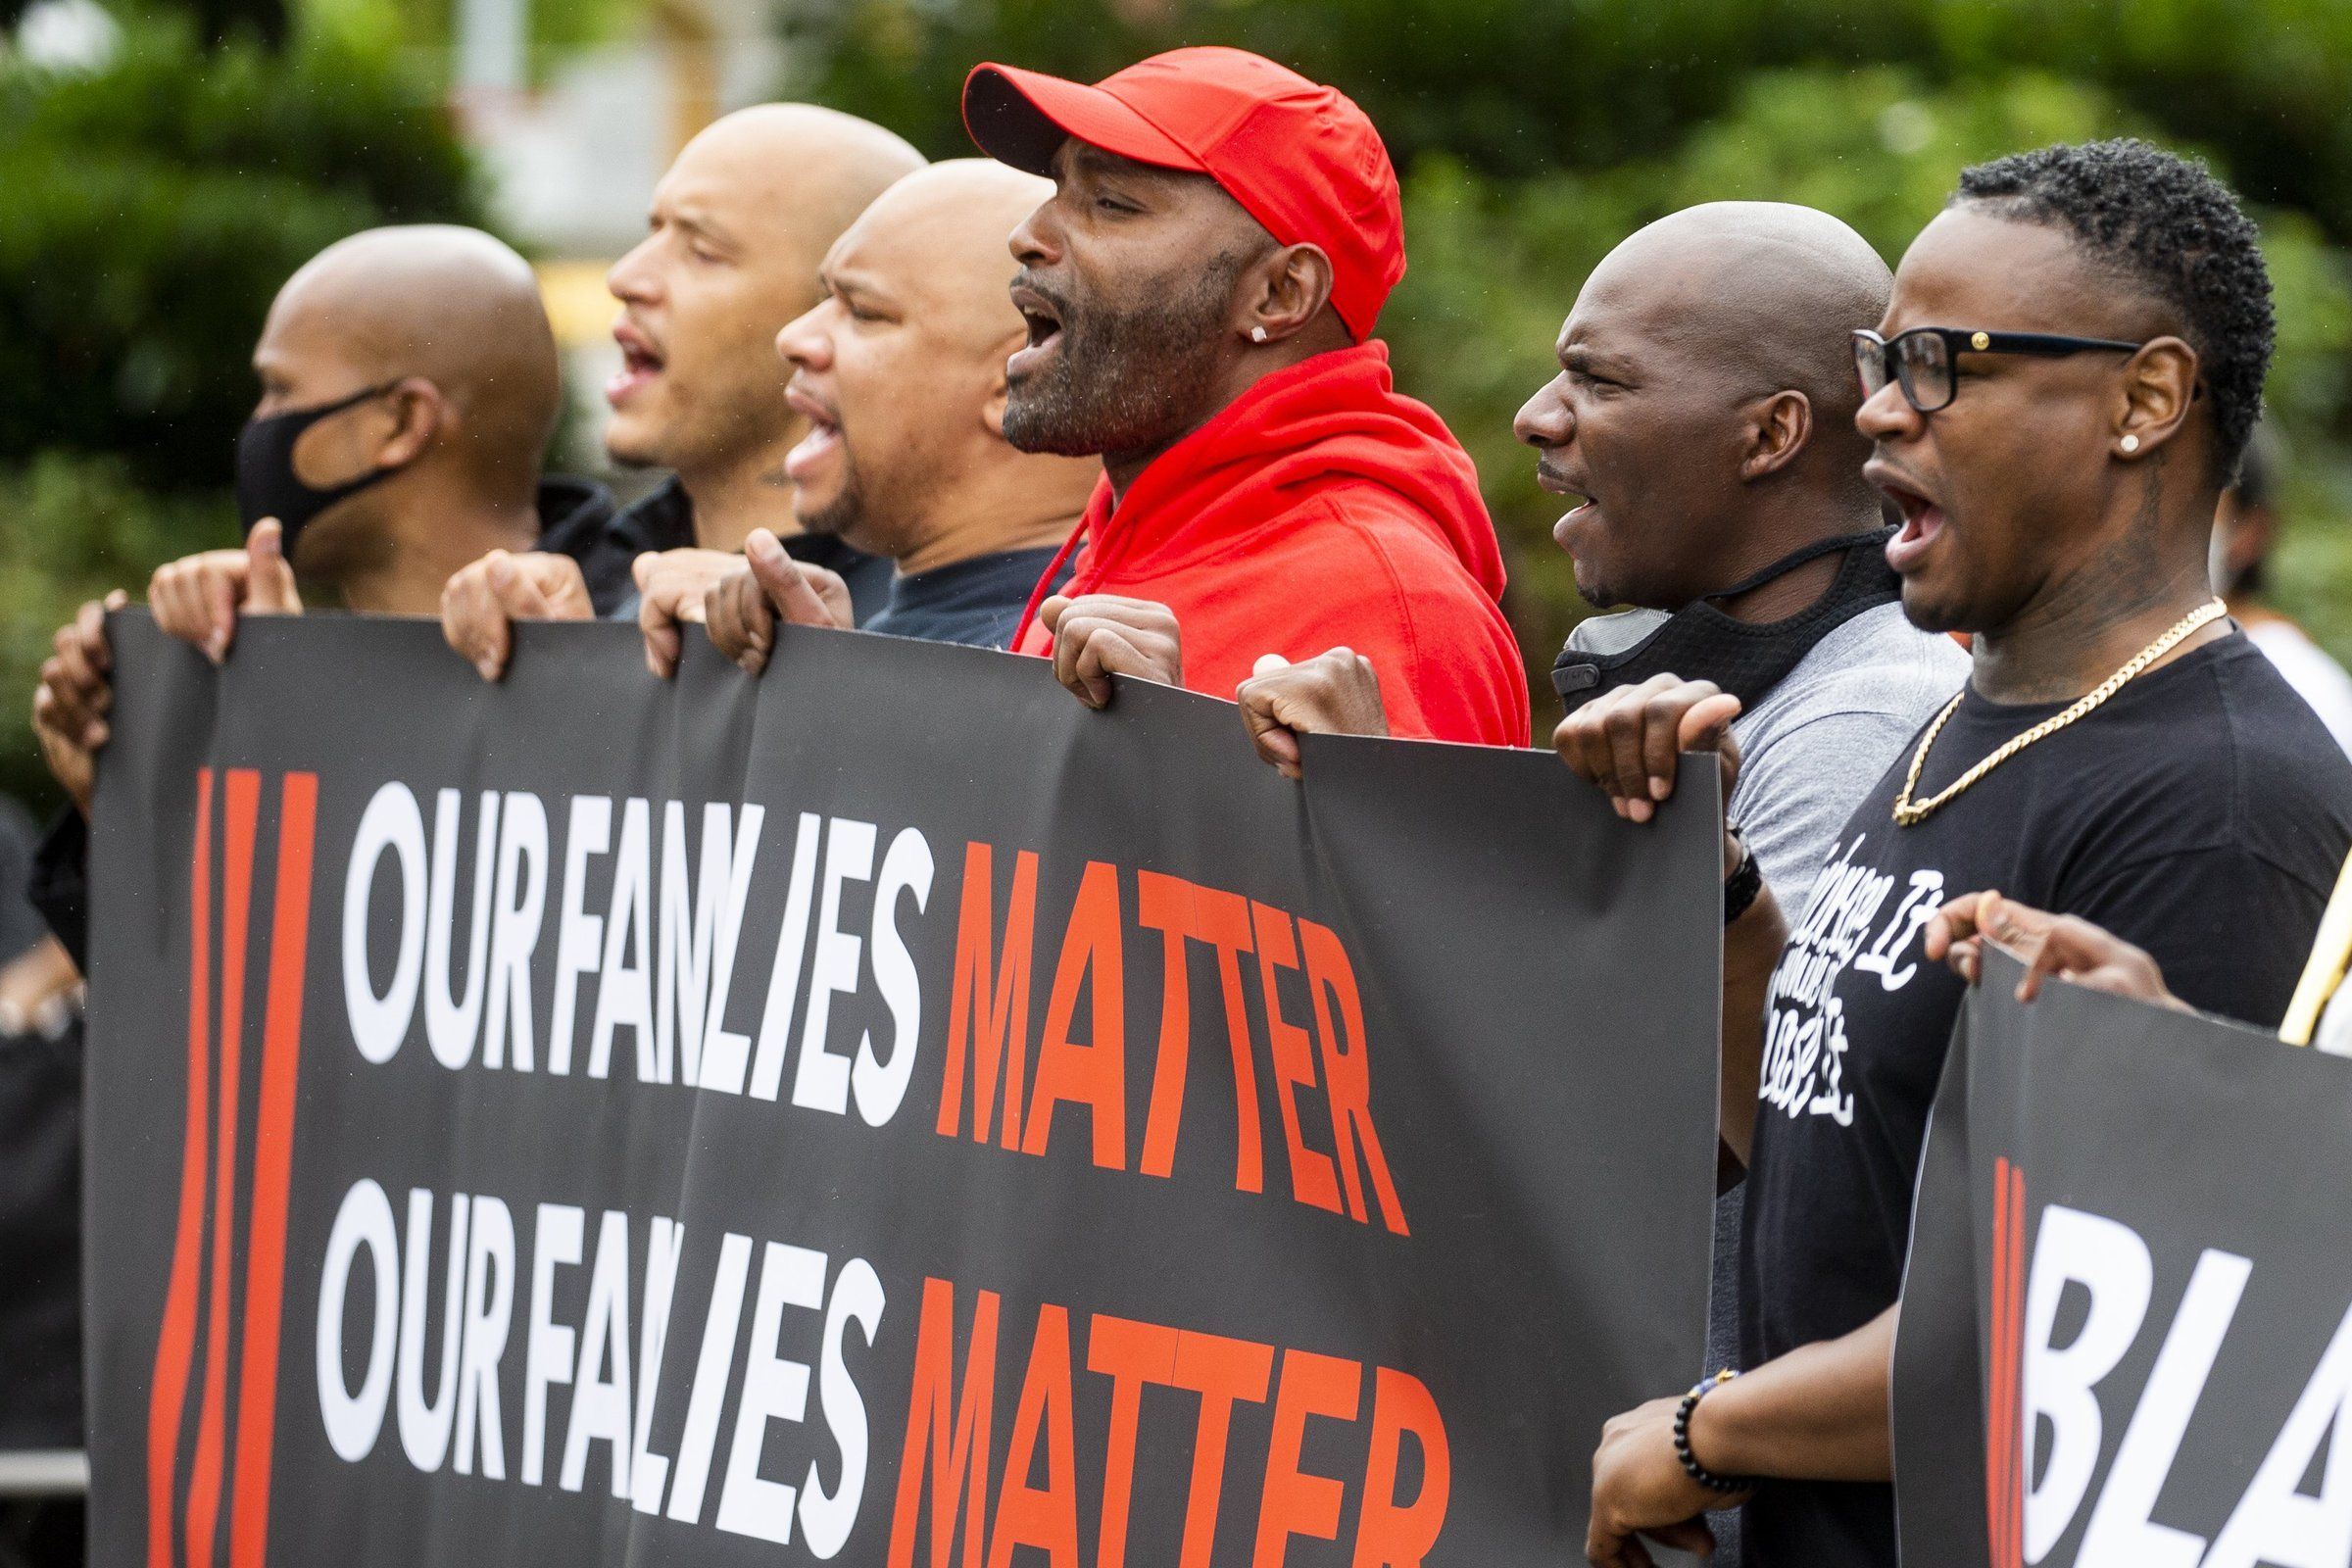 Pre-Father's Day march highlights disproportionate incarceration